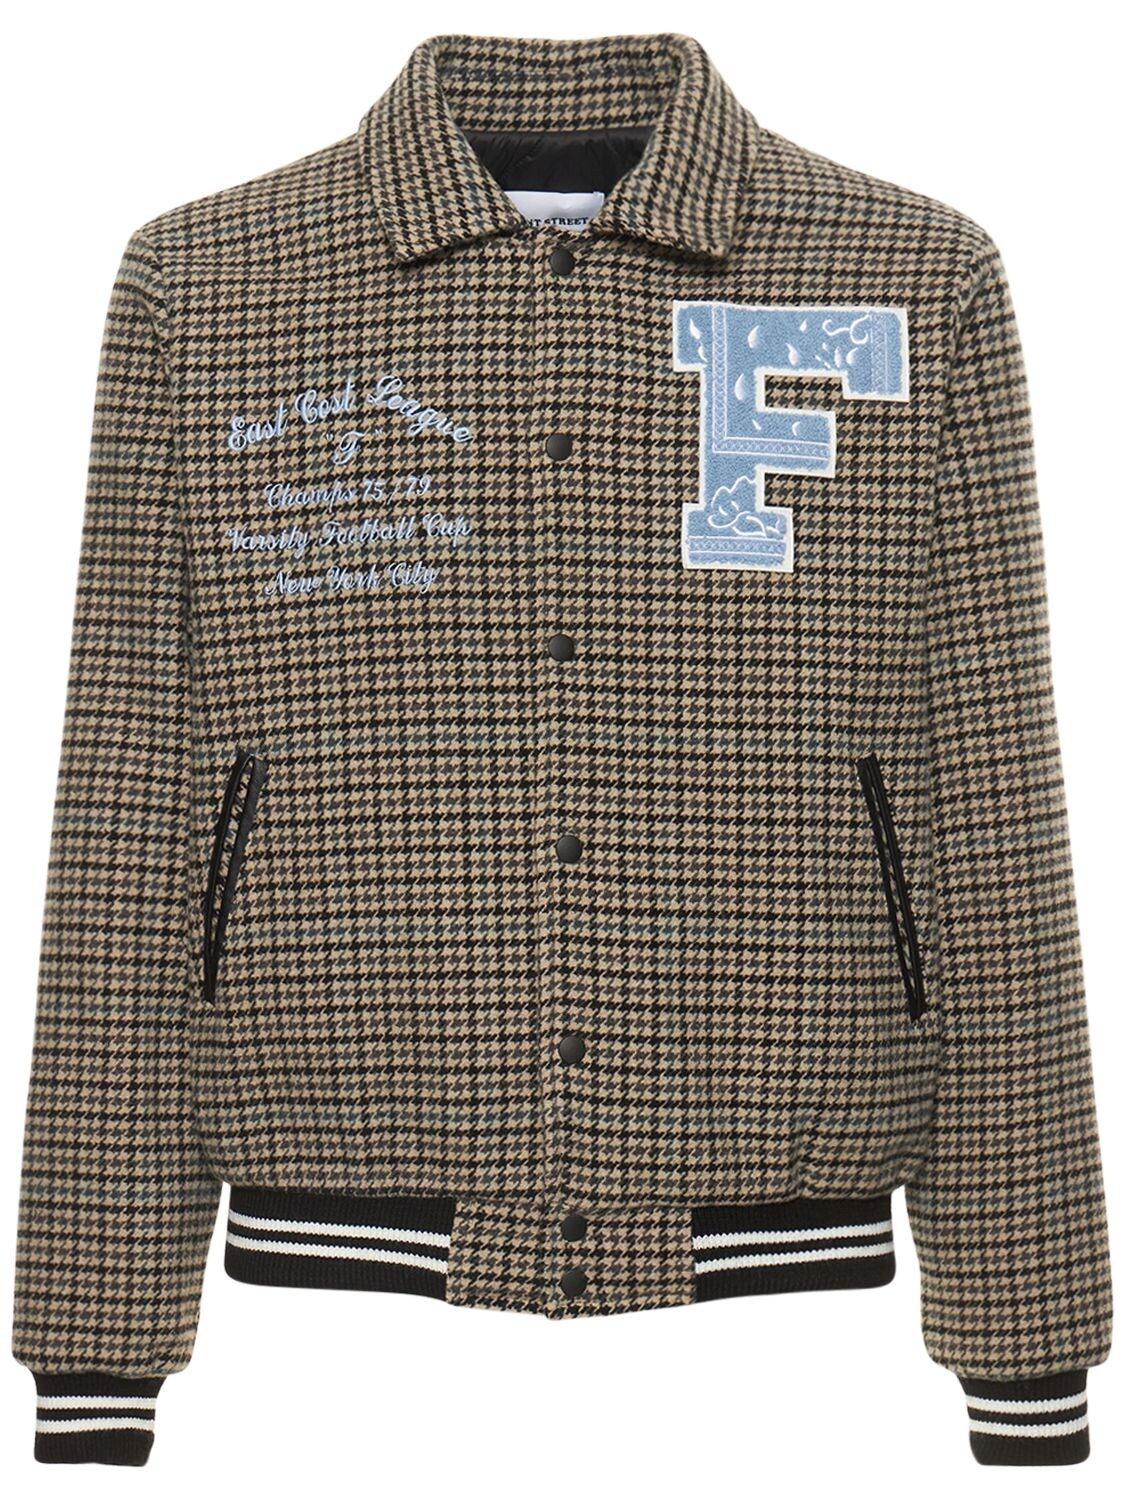 FRONT STREET 8 Wool Bend Varsity Jacket W/patches